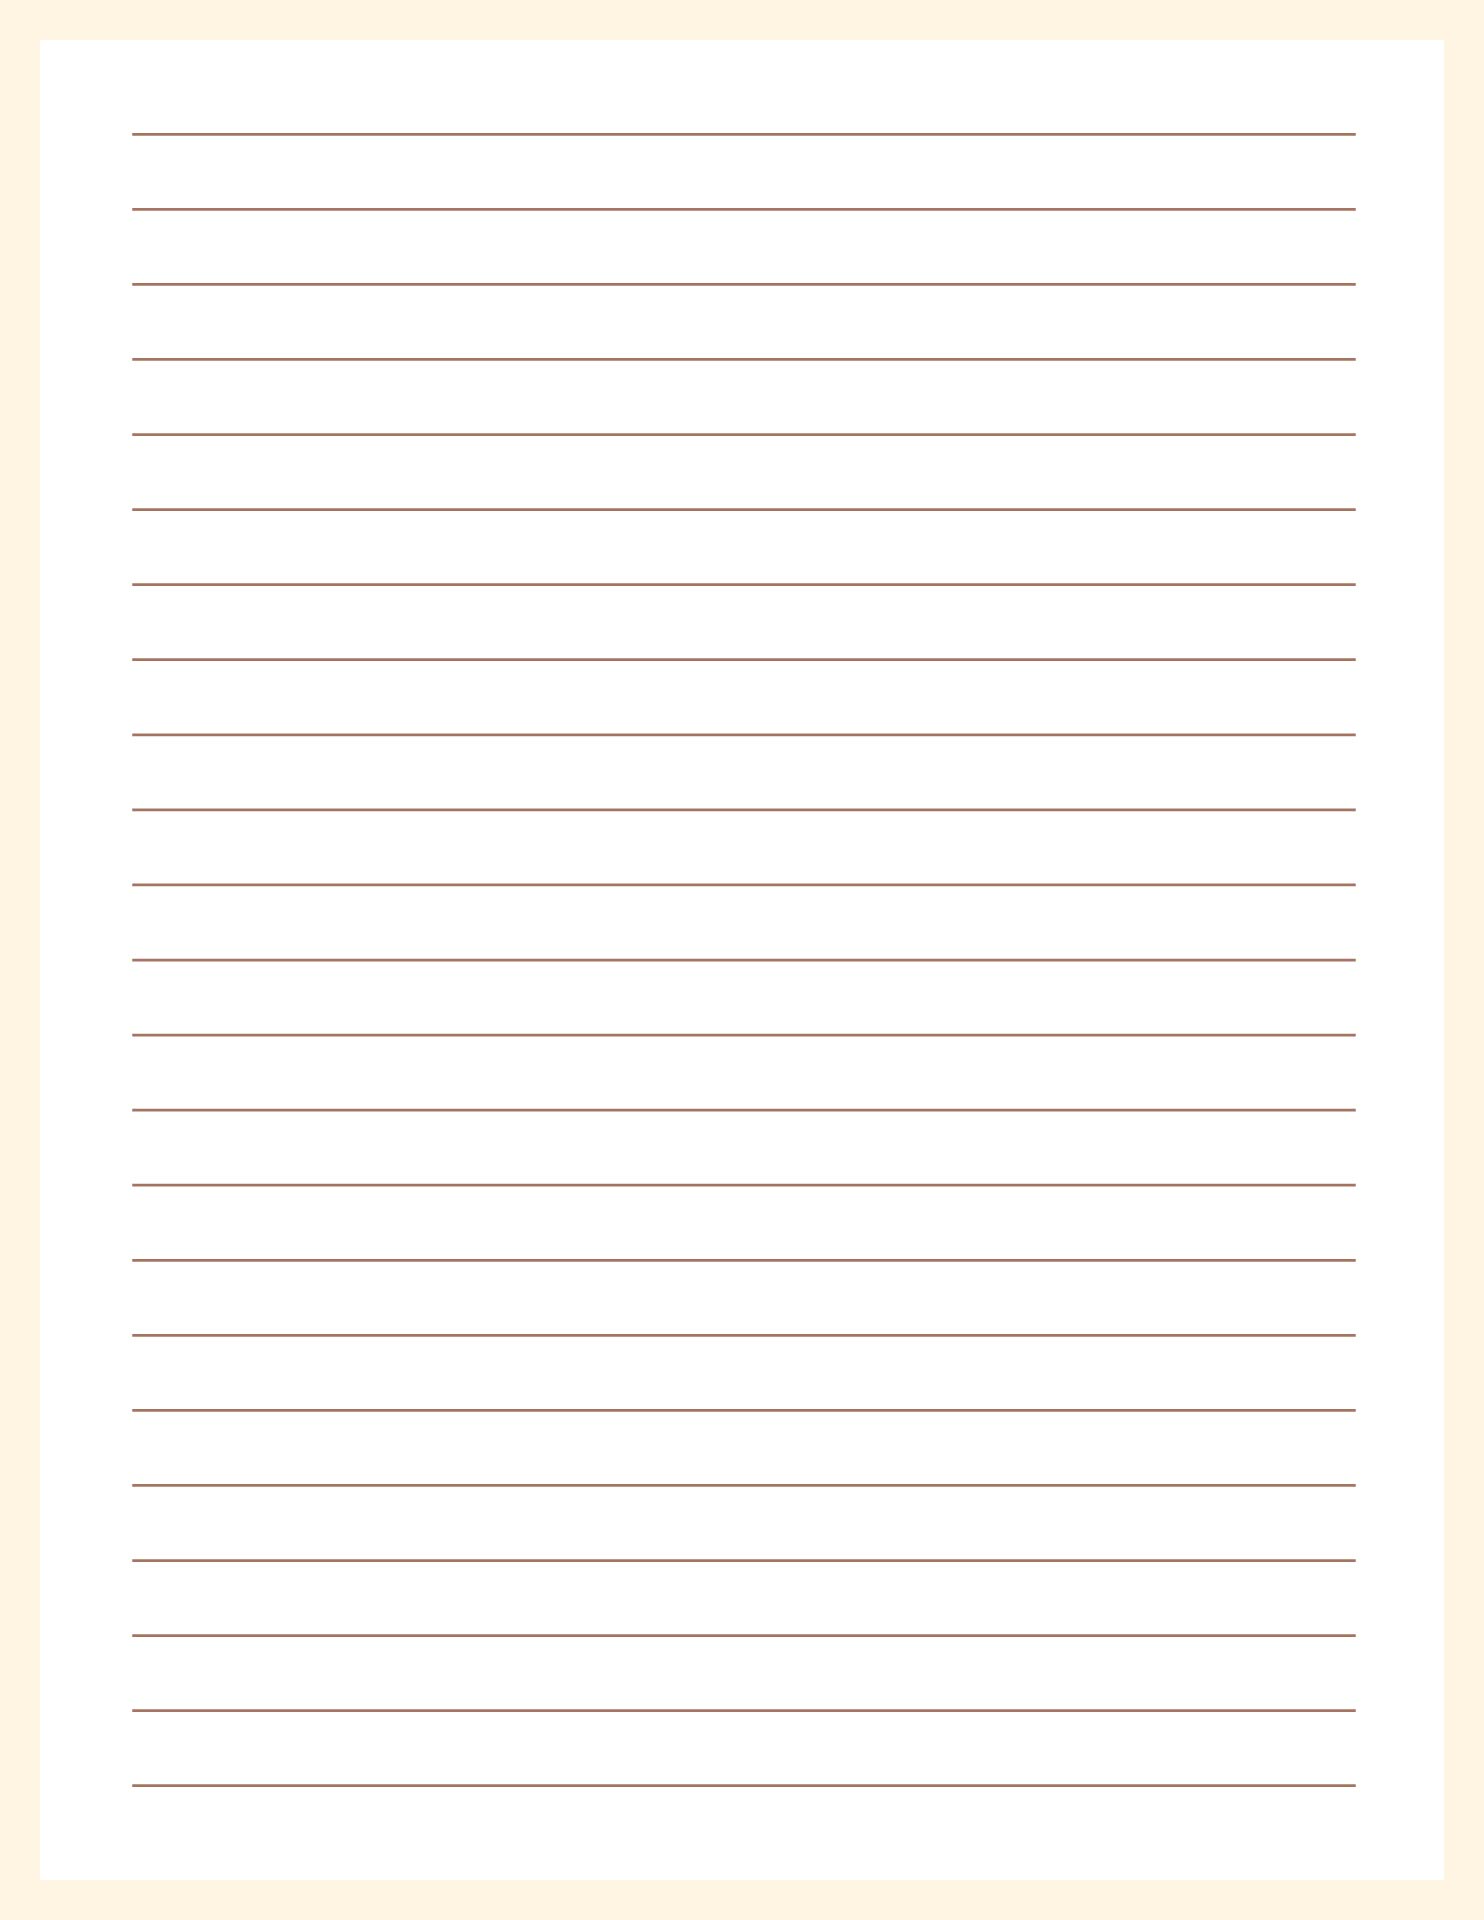 can-you-print-on-lined-paper-reportz515-web-fc2